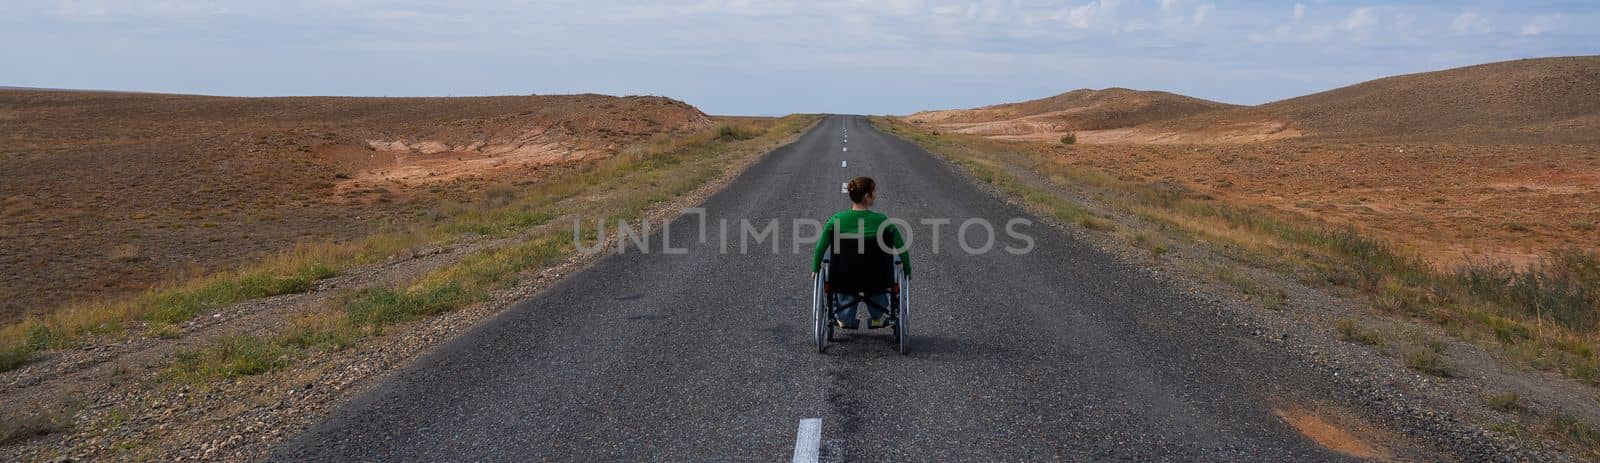 Woman in a wheelchair on a highway in the steppes. by mrwed54